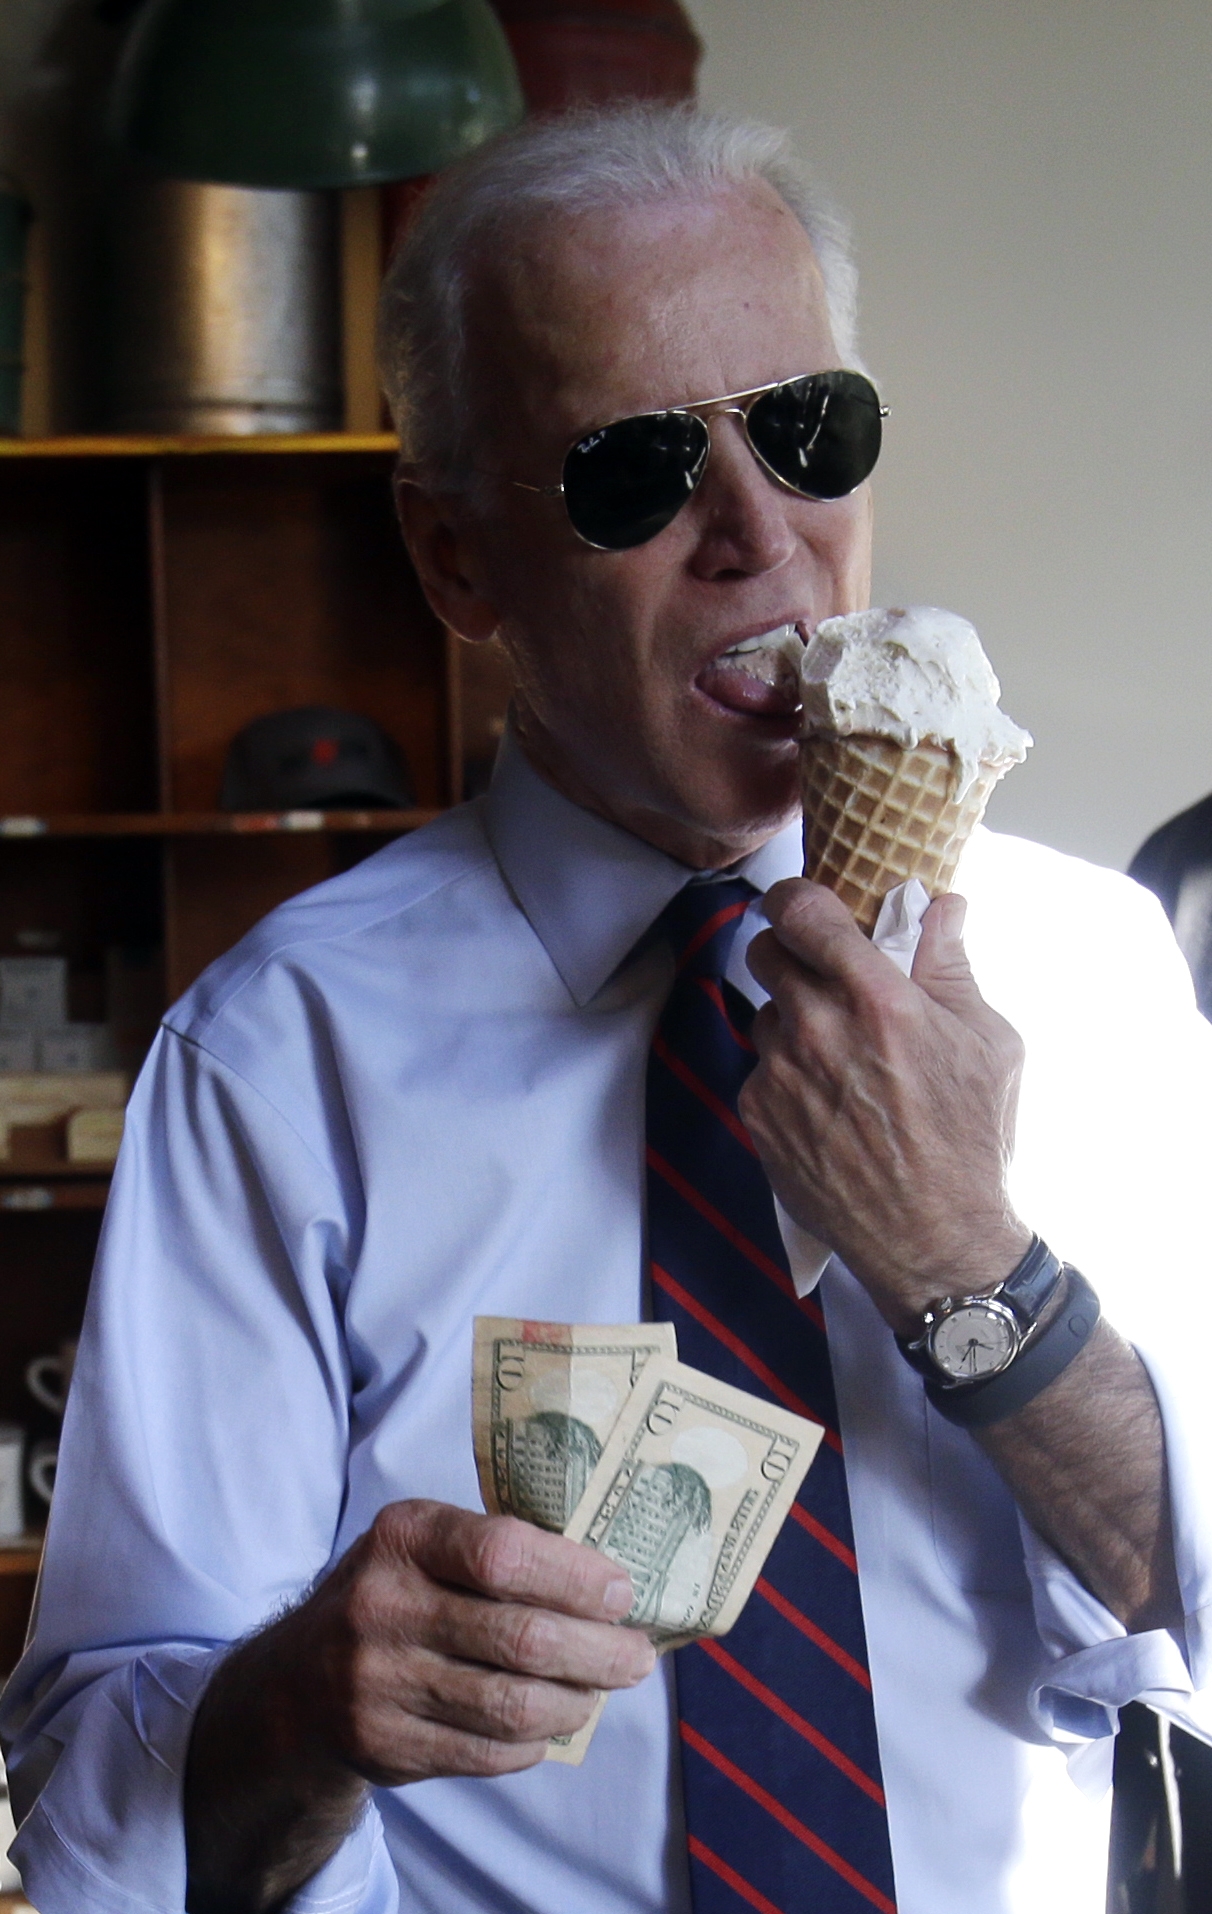 Vice President Joe Biden gets ready to pay for an ice cream cone after a campaign rally for U.S. Sen. Jeff Merkley in Portland, Ore., Wednesday, Oct. 8, 2014. (Don Ryan—AP)